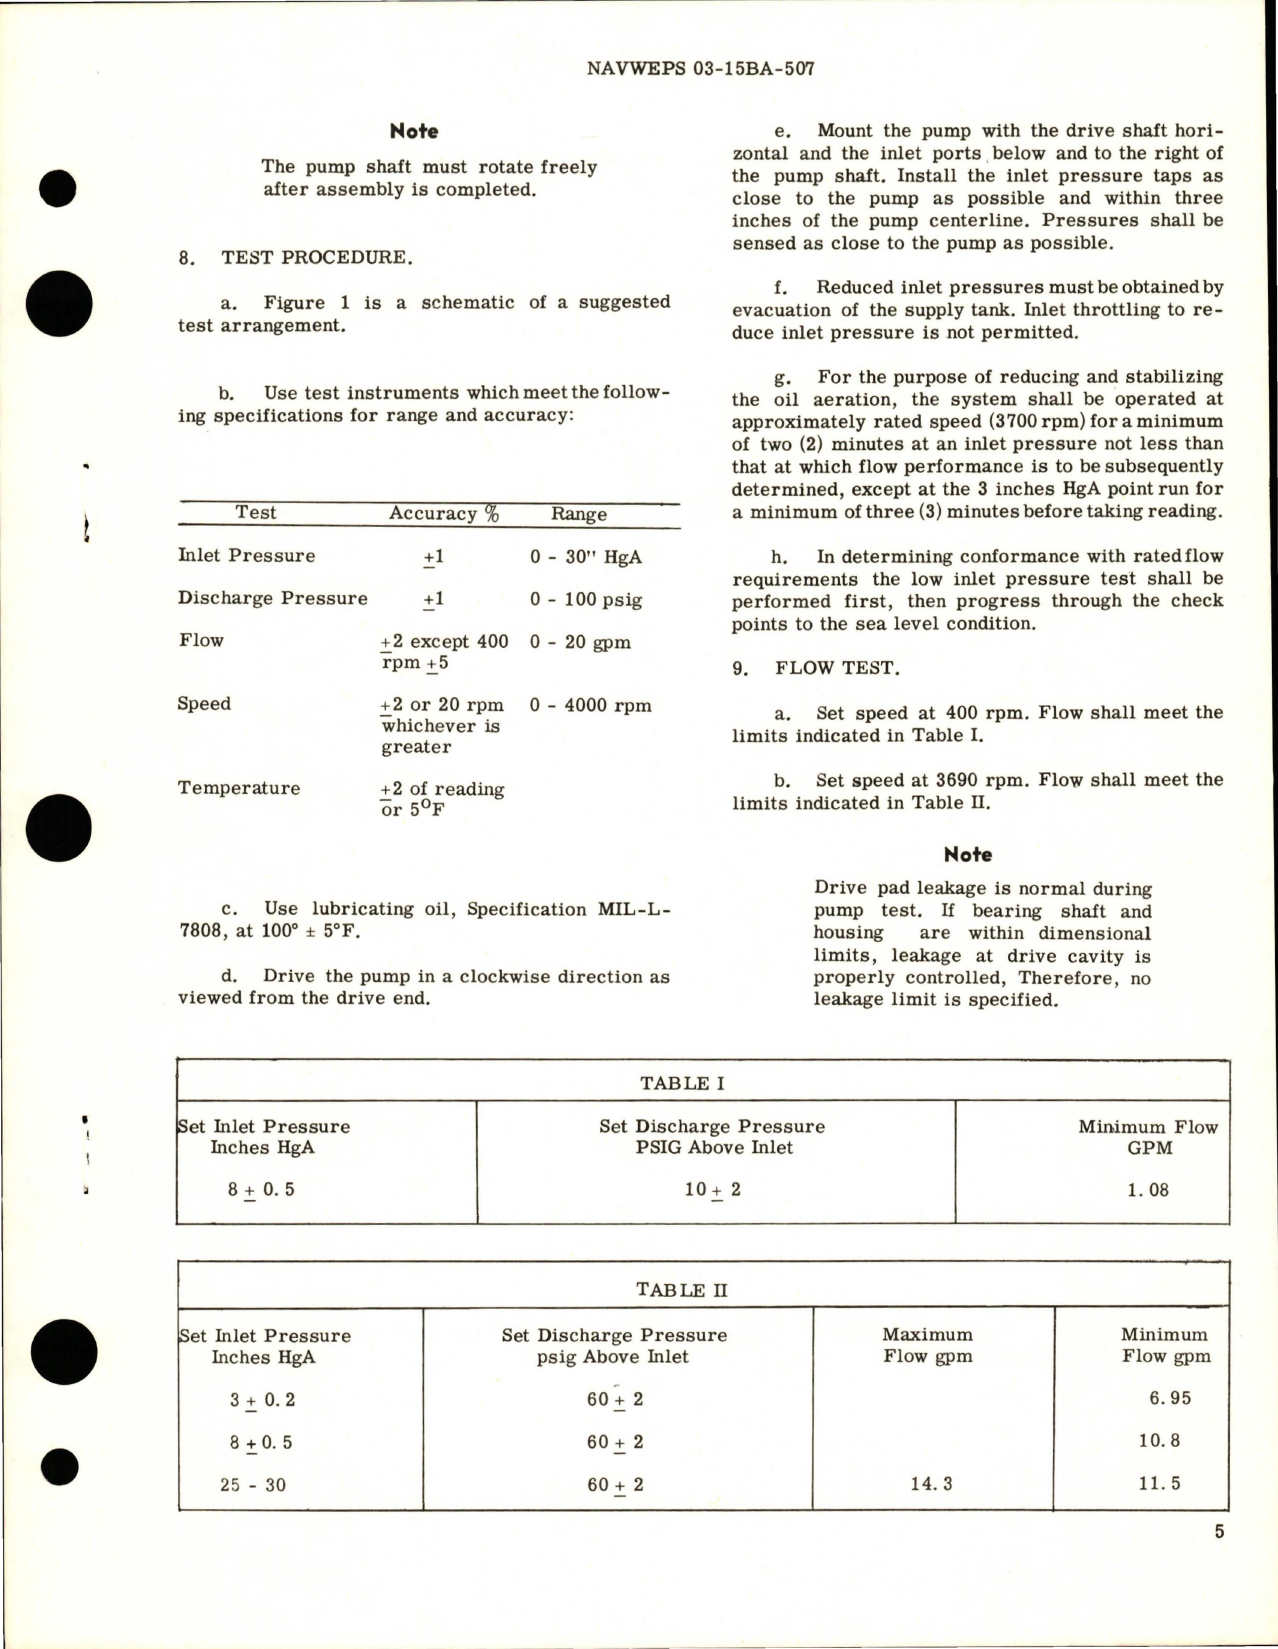 Sample page 5 from AirCorps Library document: Overhaul Instructions with Parts Breakdown for Scavenge Pump 